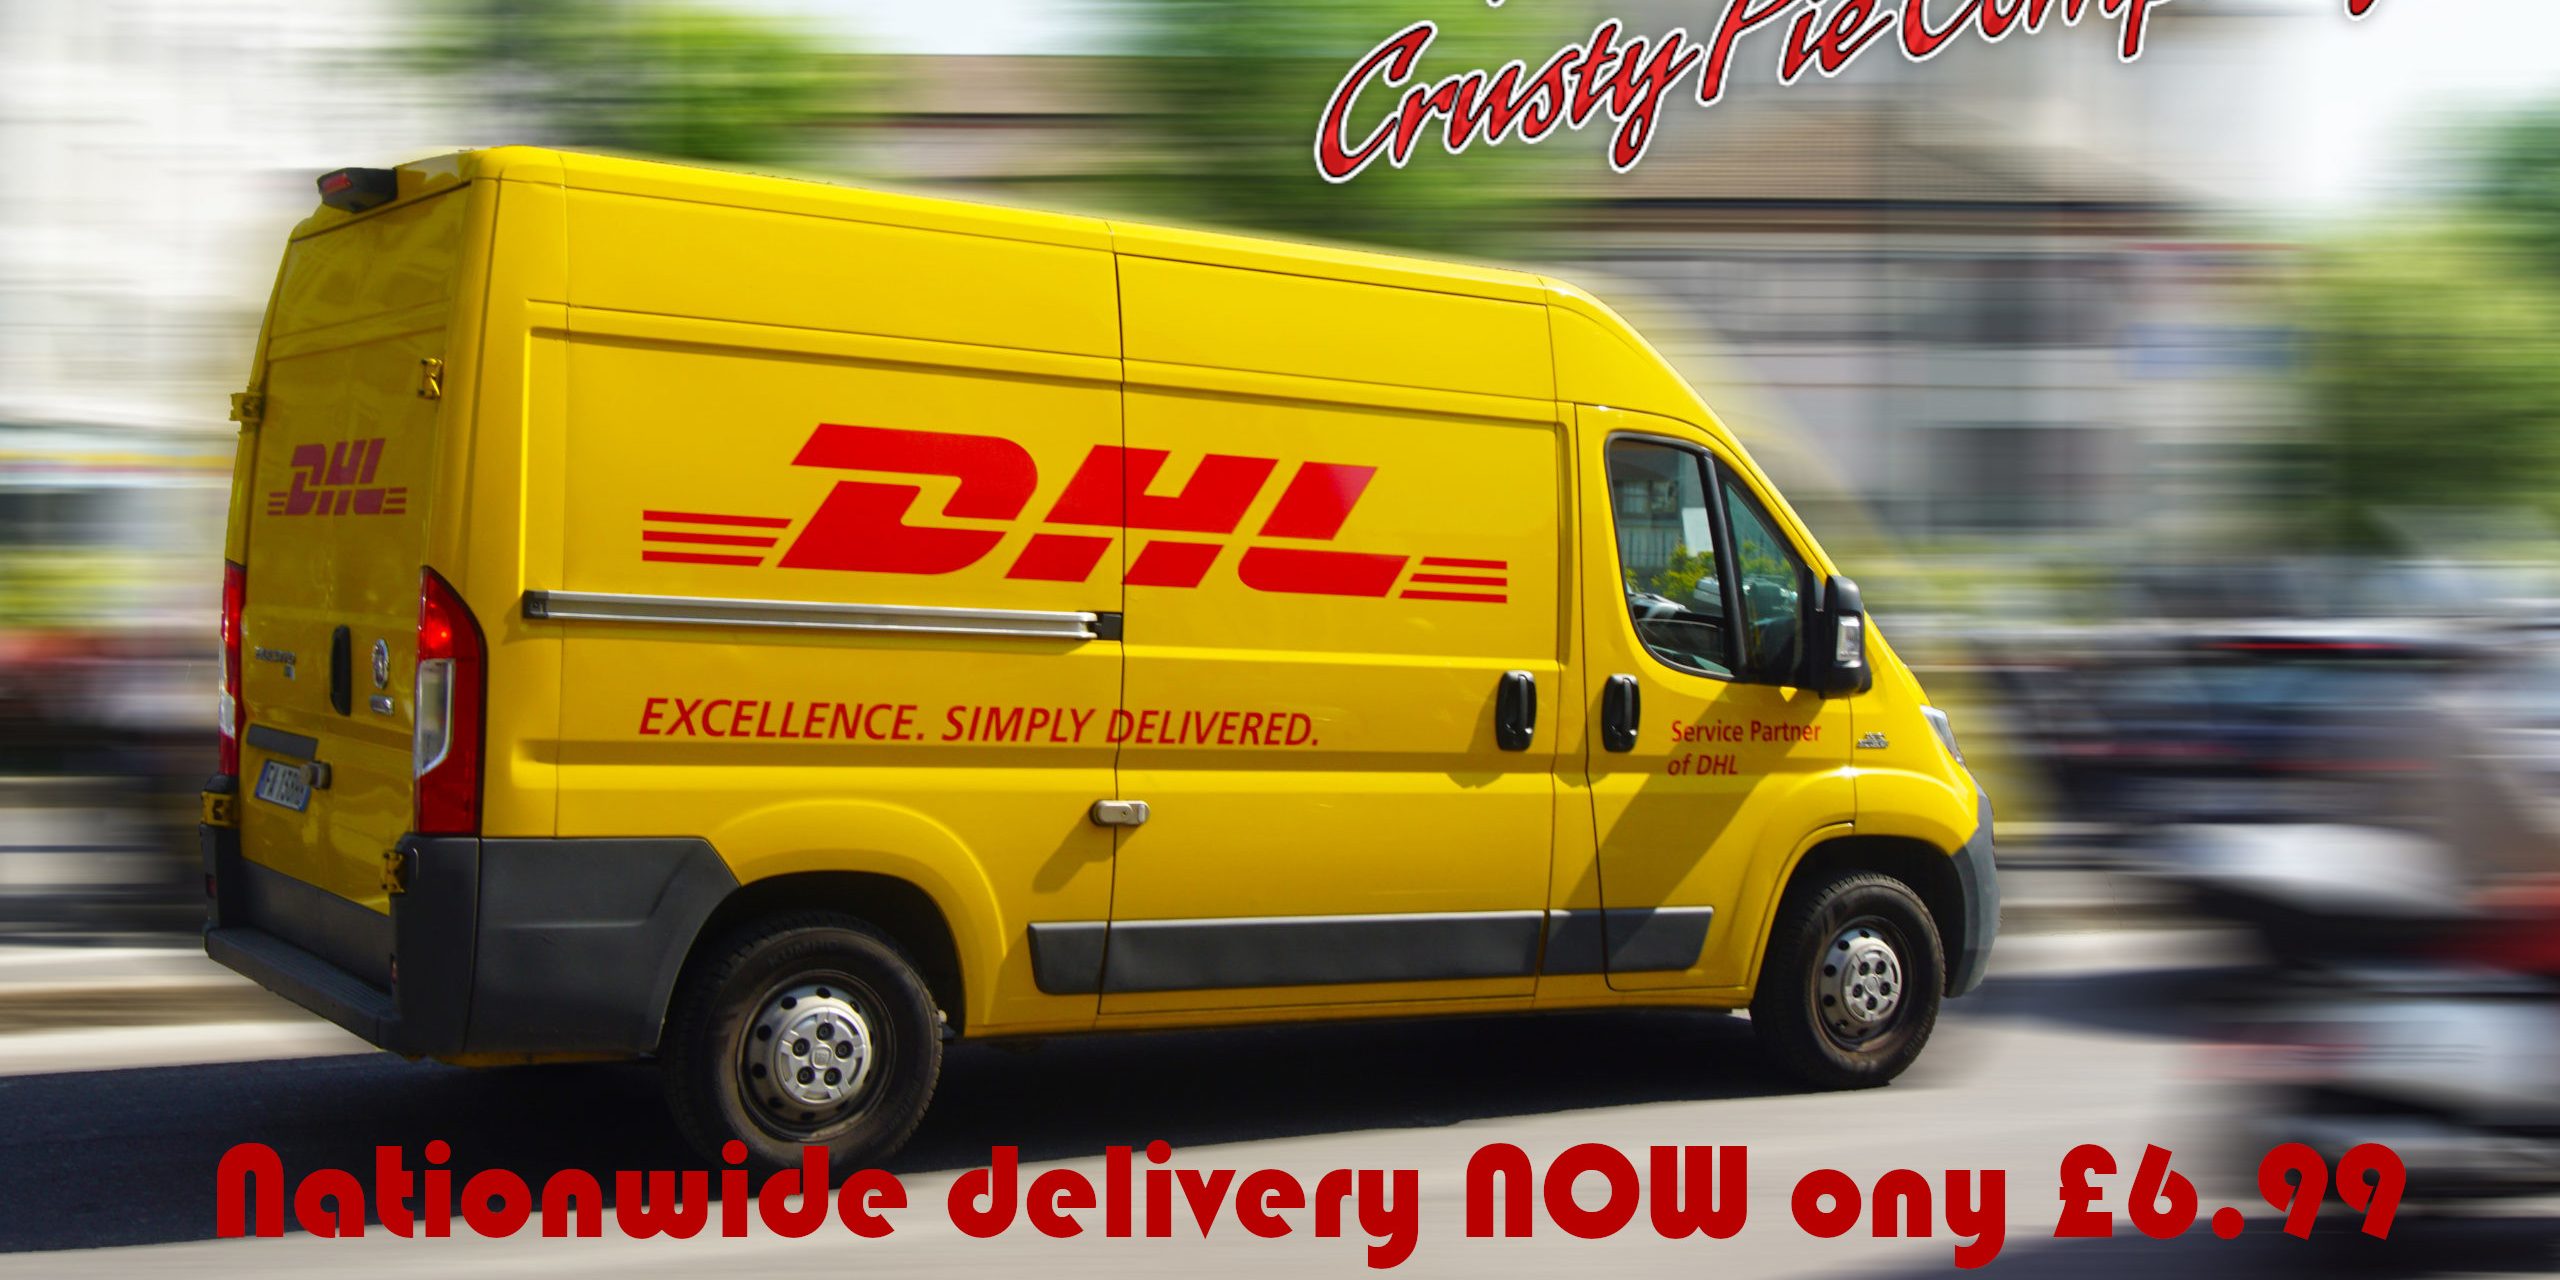 DHL delivery | The Crusty Pie Company